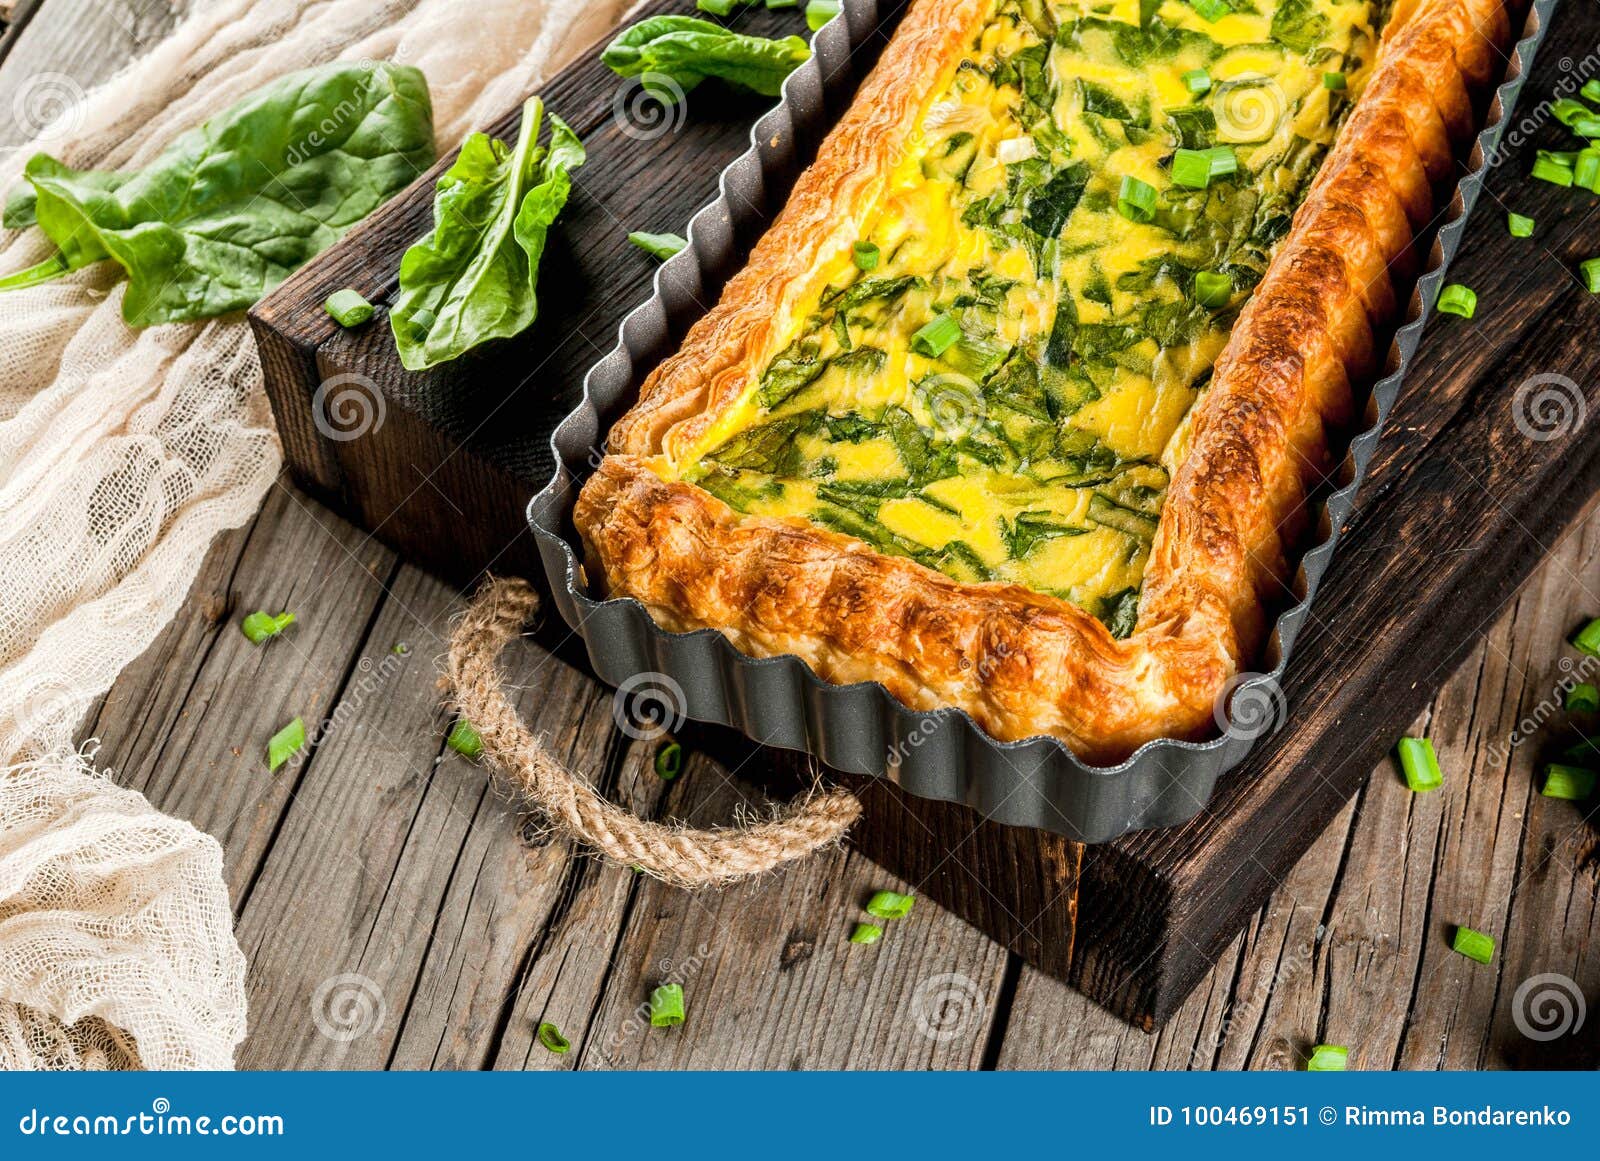 Quiche Lorraine with Spinach and Green Onion Stock Image - Image of ...